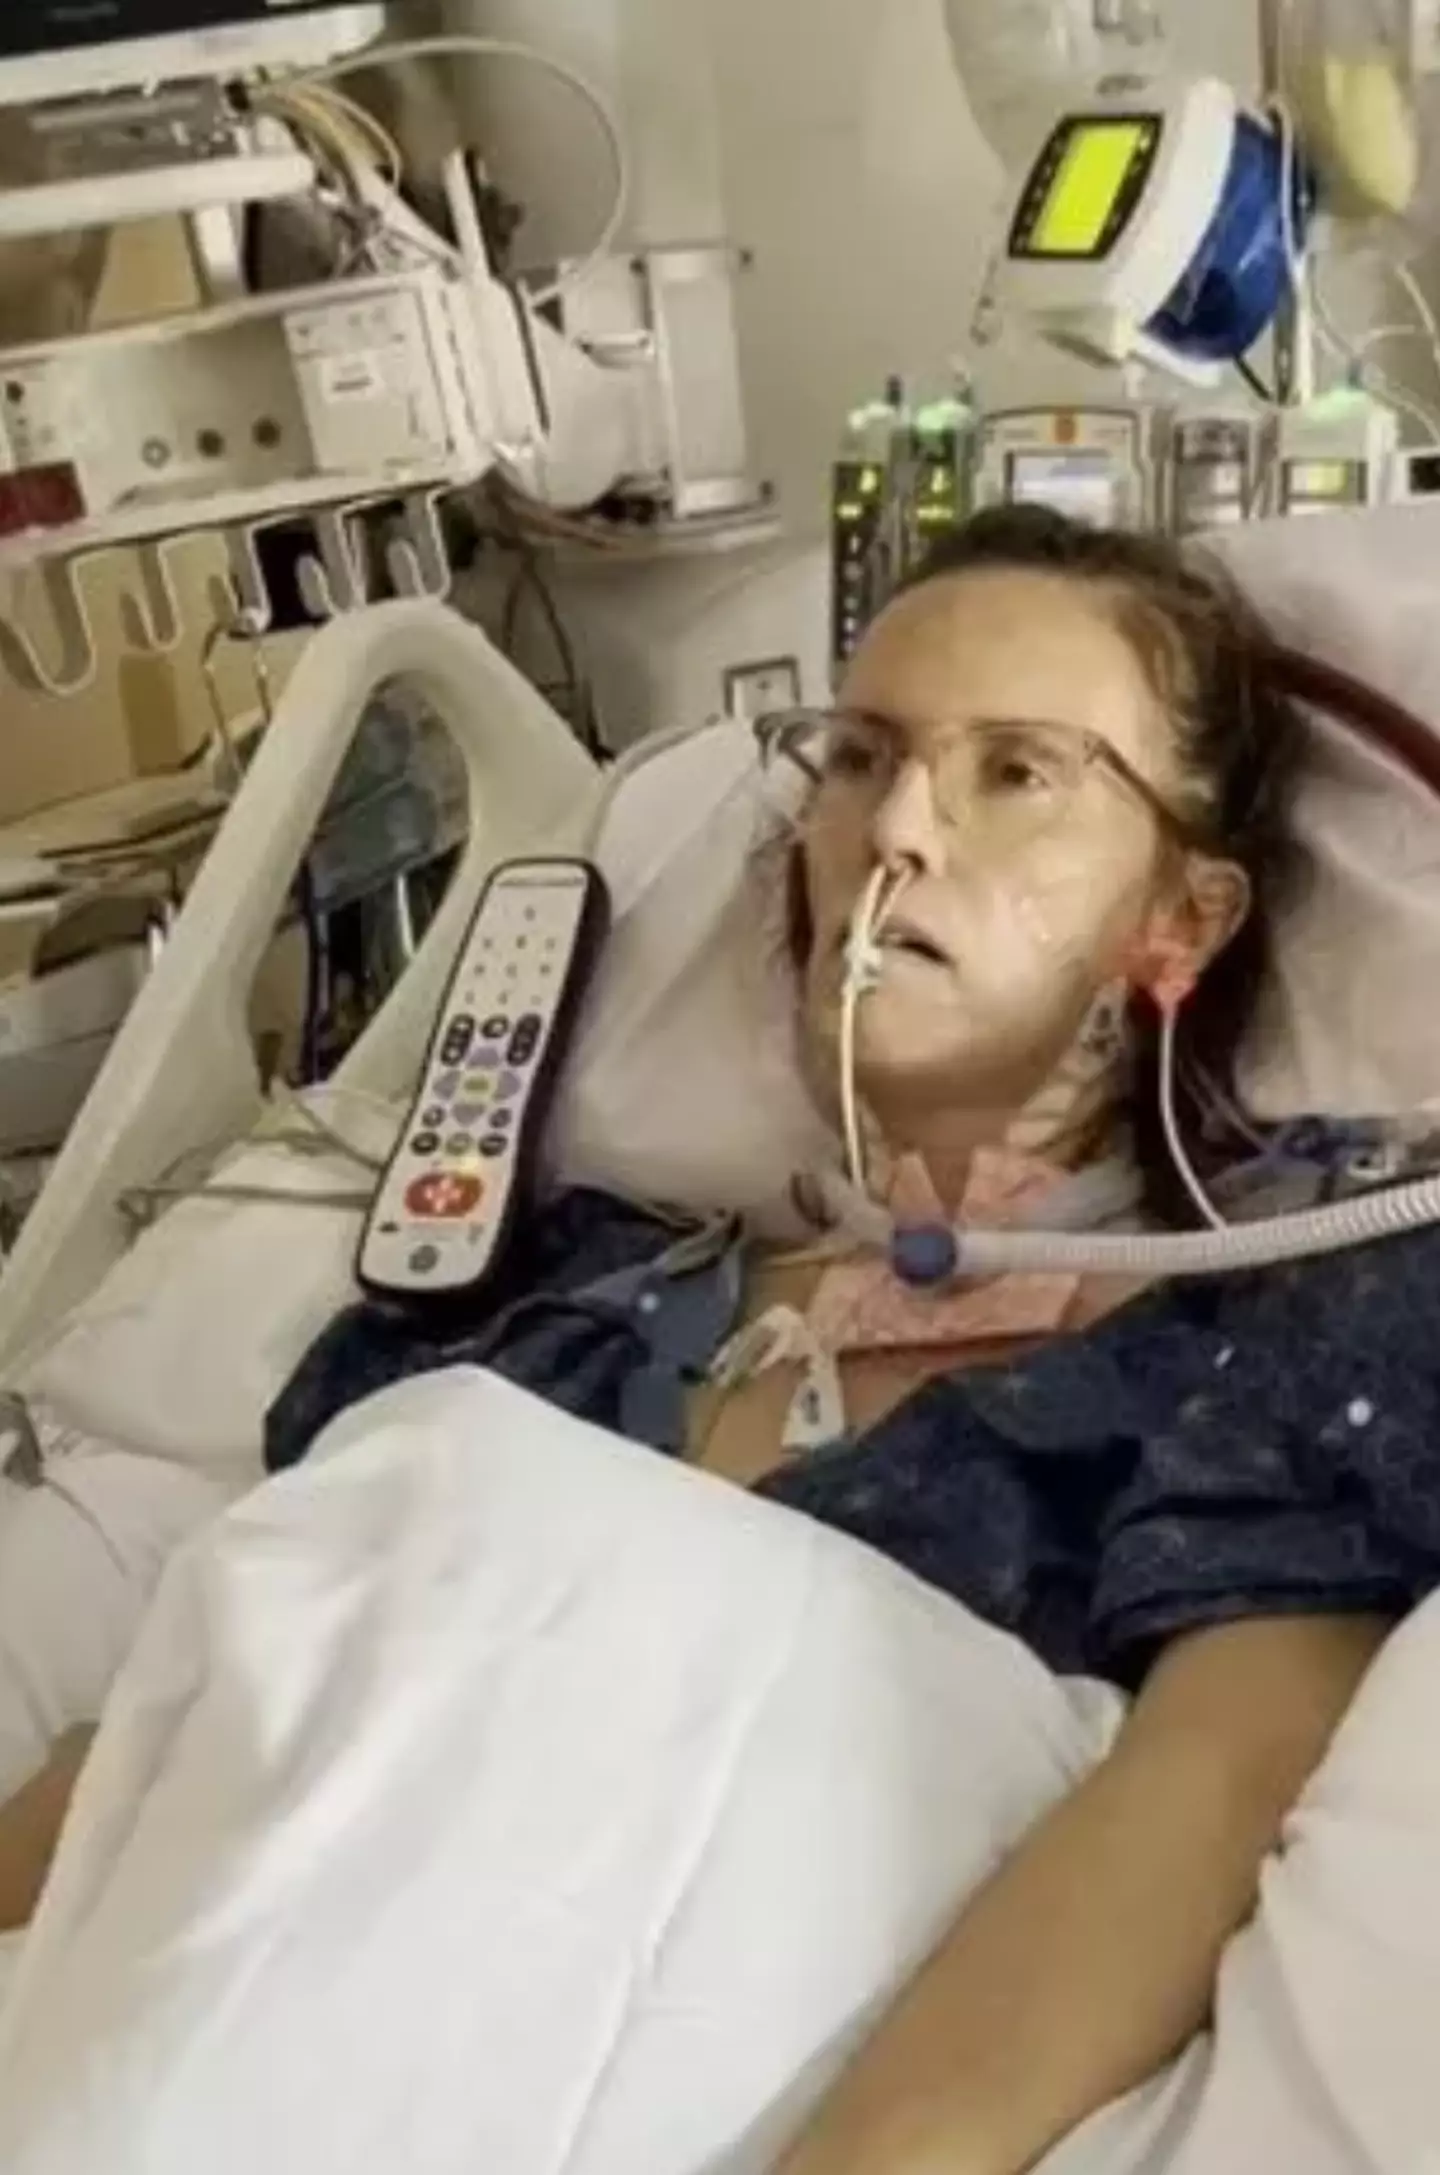 The mum-of-two was placed into a medically-induced coma. (YouTube)